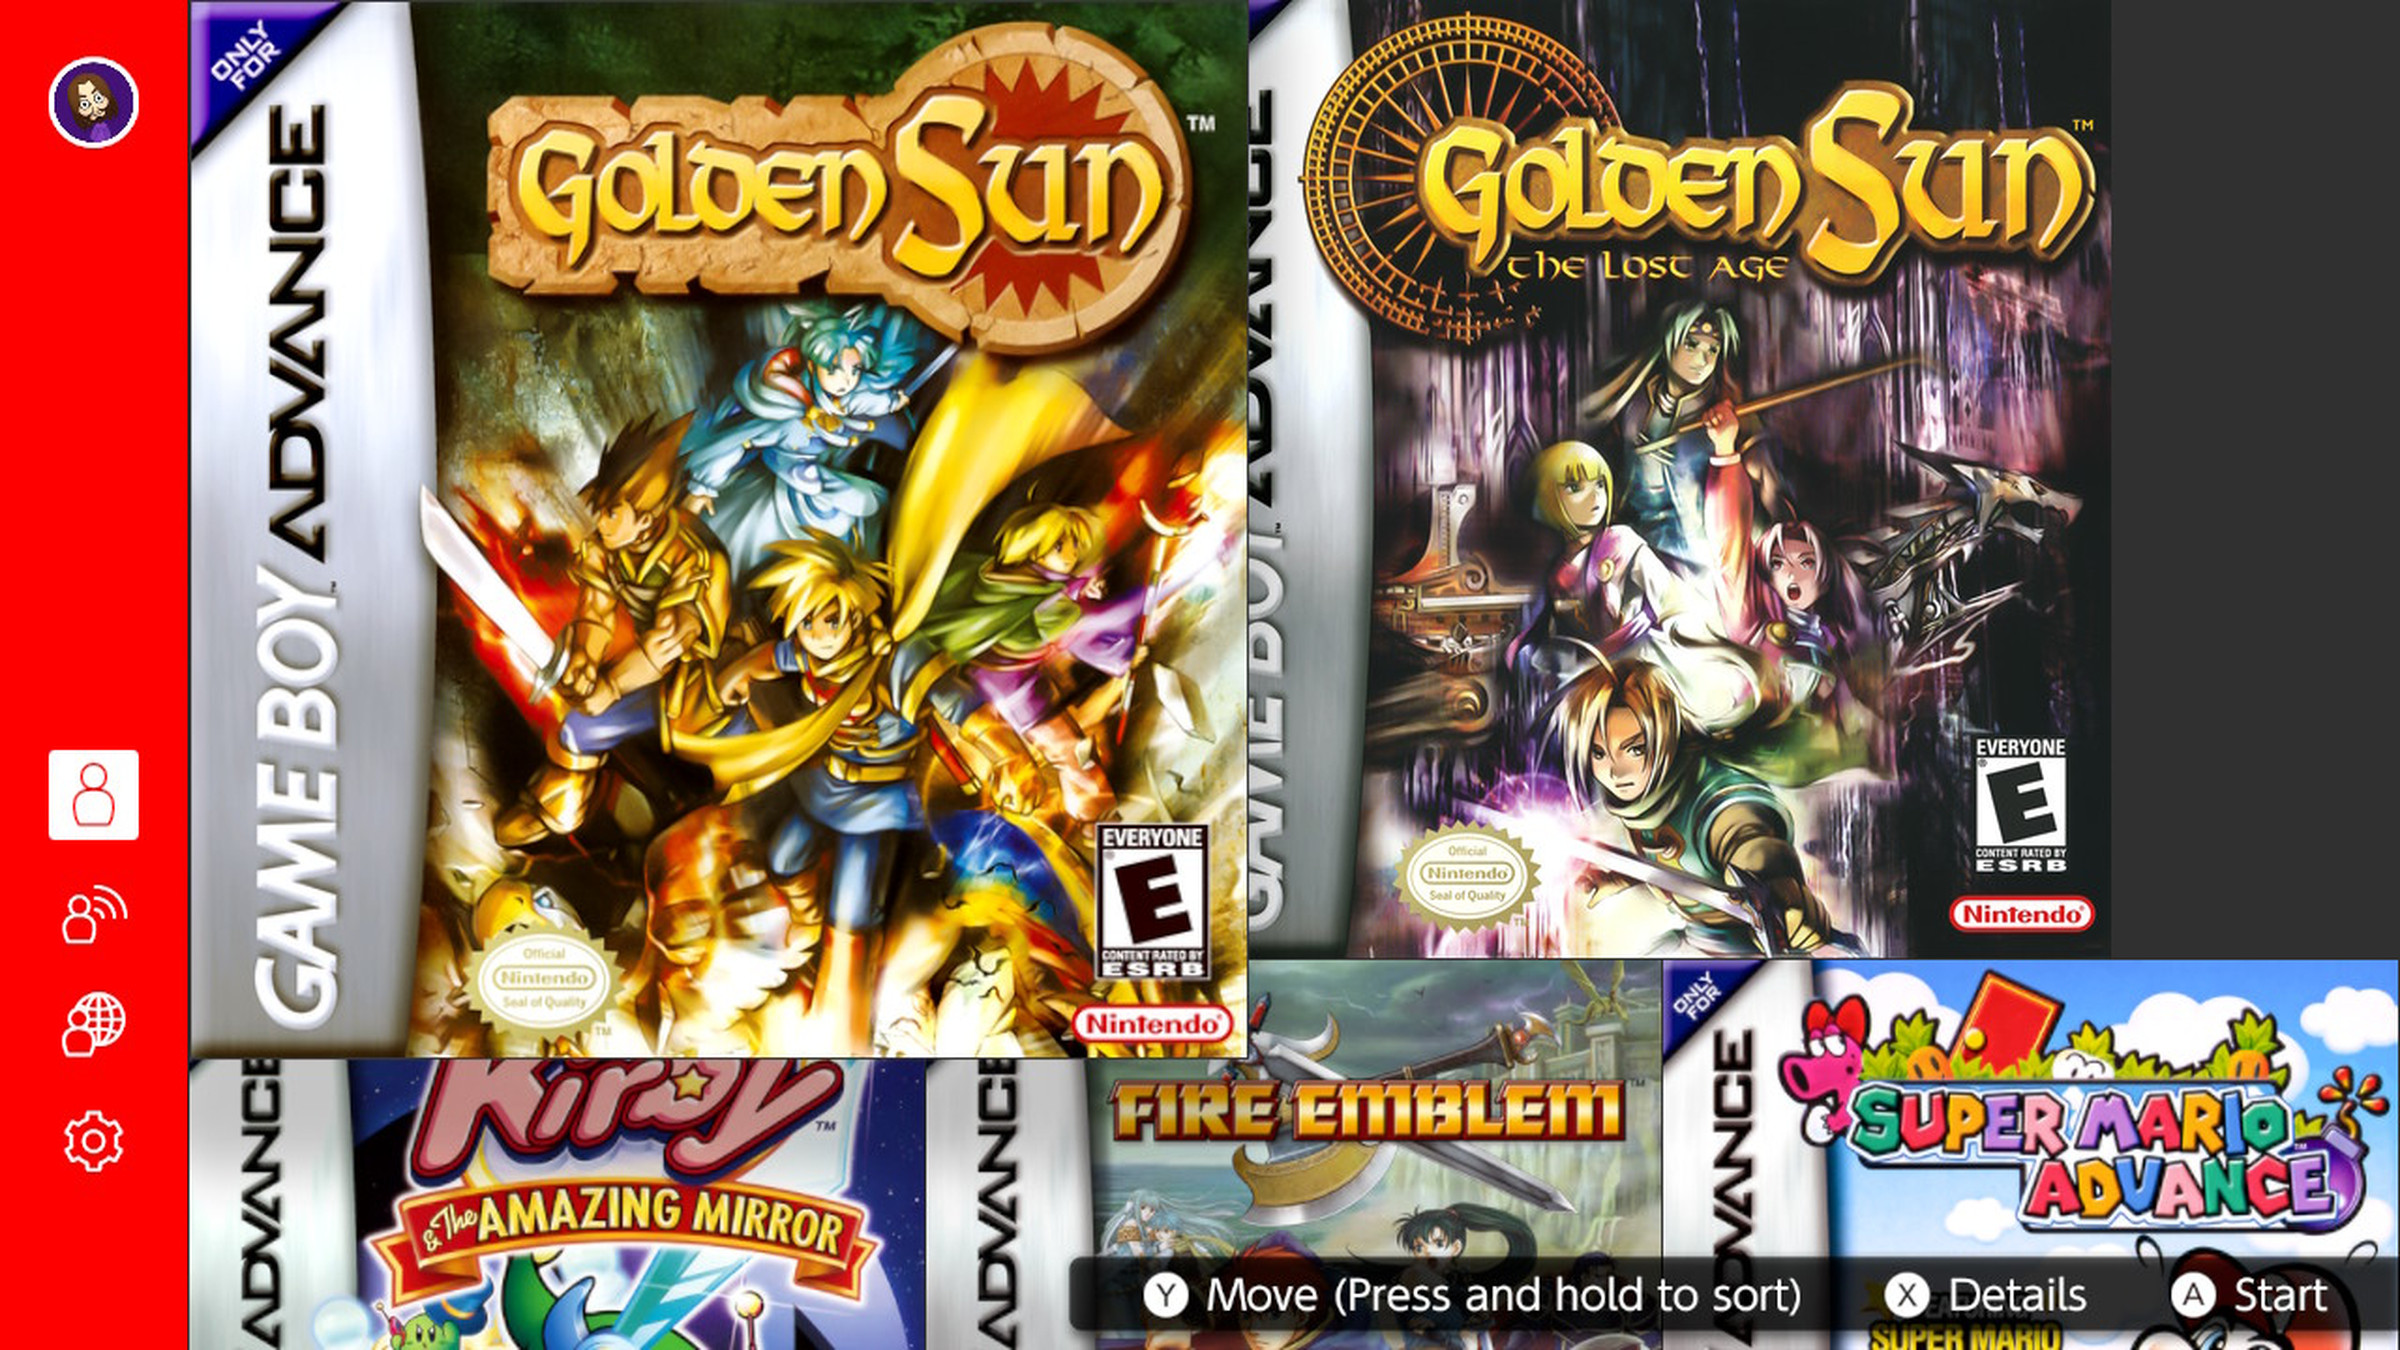 The cover art for Golden Sun and its sequel in the Nintendo Switch Game Boy Advance app.